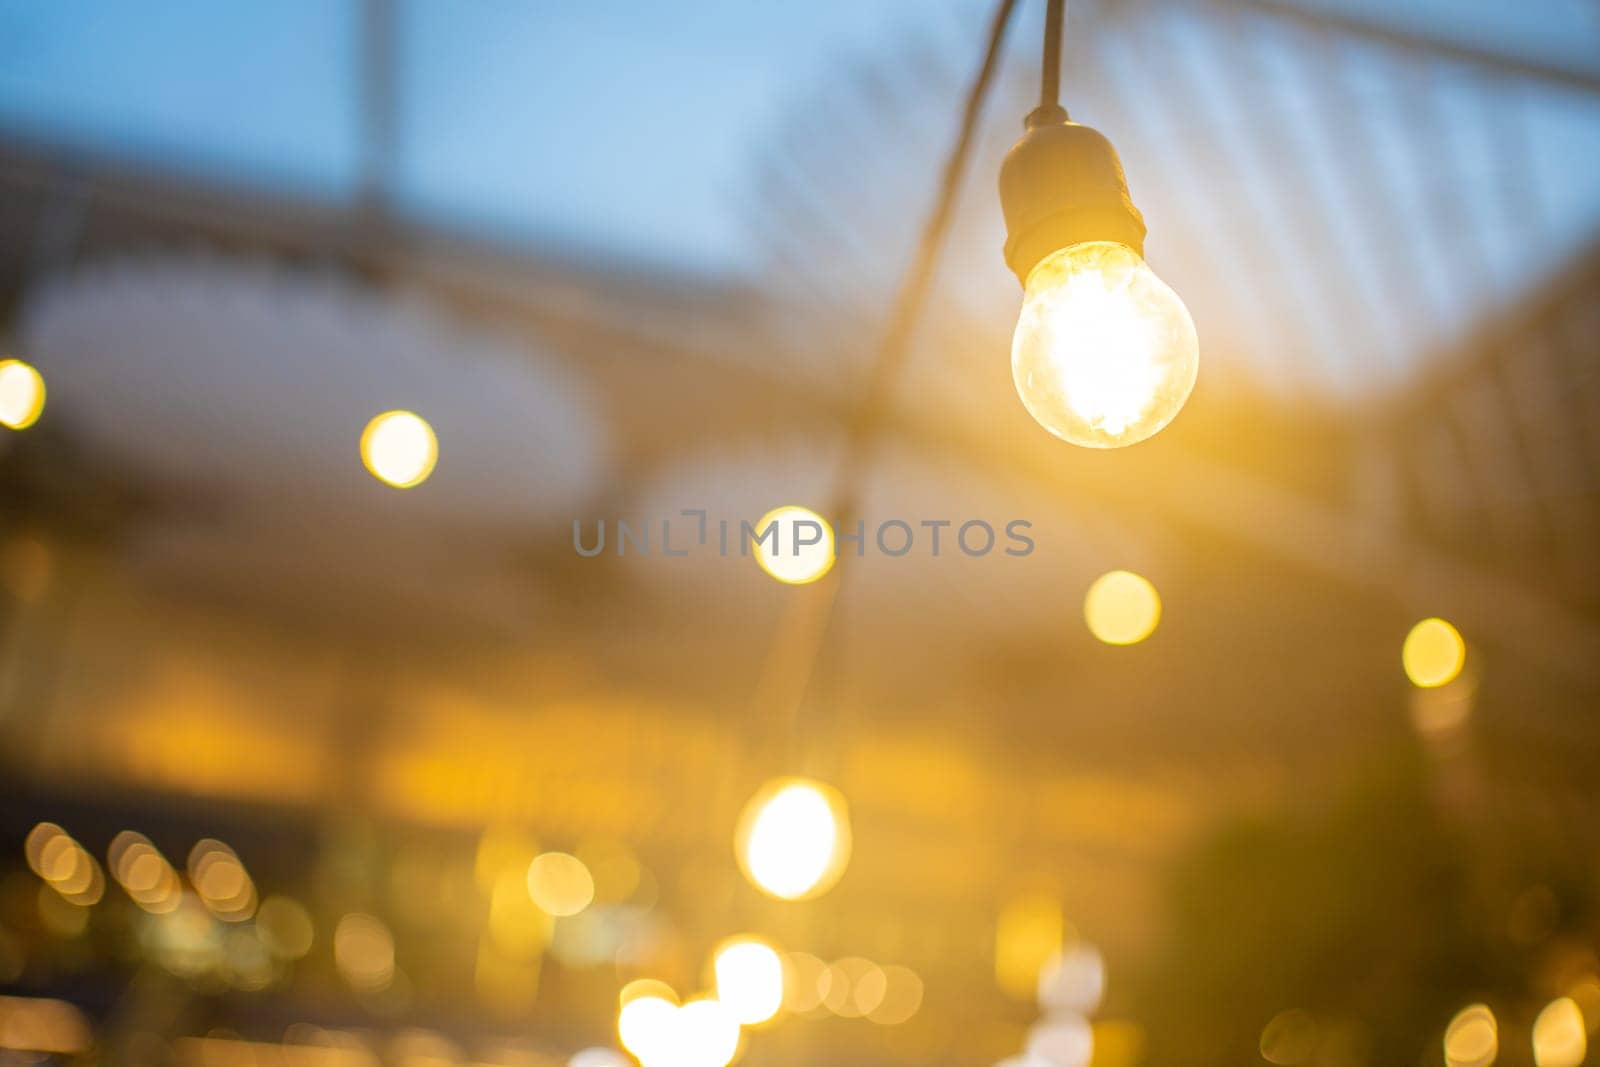 Blurred background, backyard illumination, light in evening garden, electric lanterns with round diffuser. Glowing light bulb garland. Outdoor string lights hanging on line. Bokeh effect